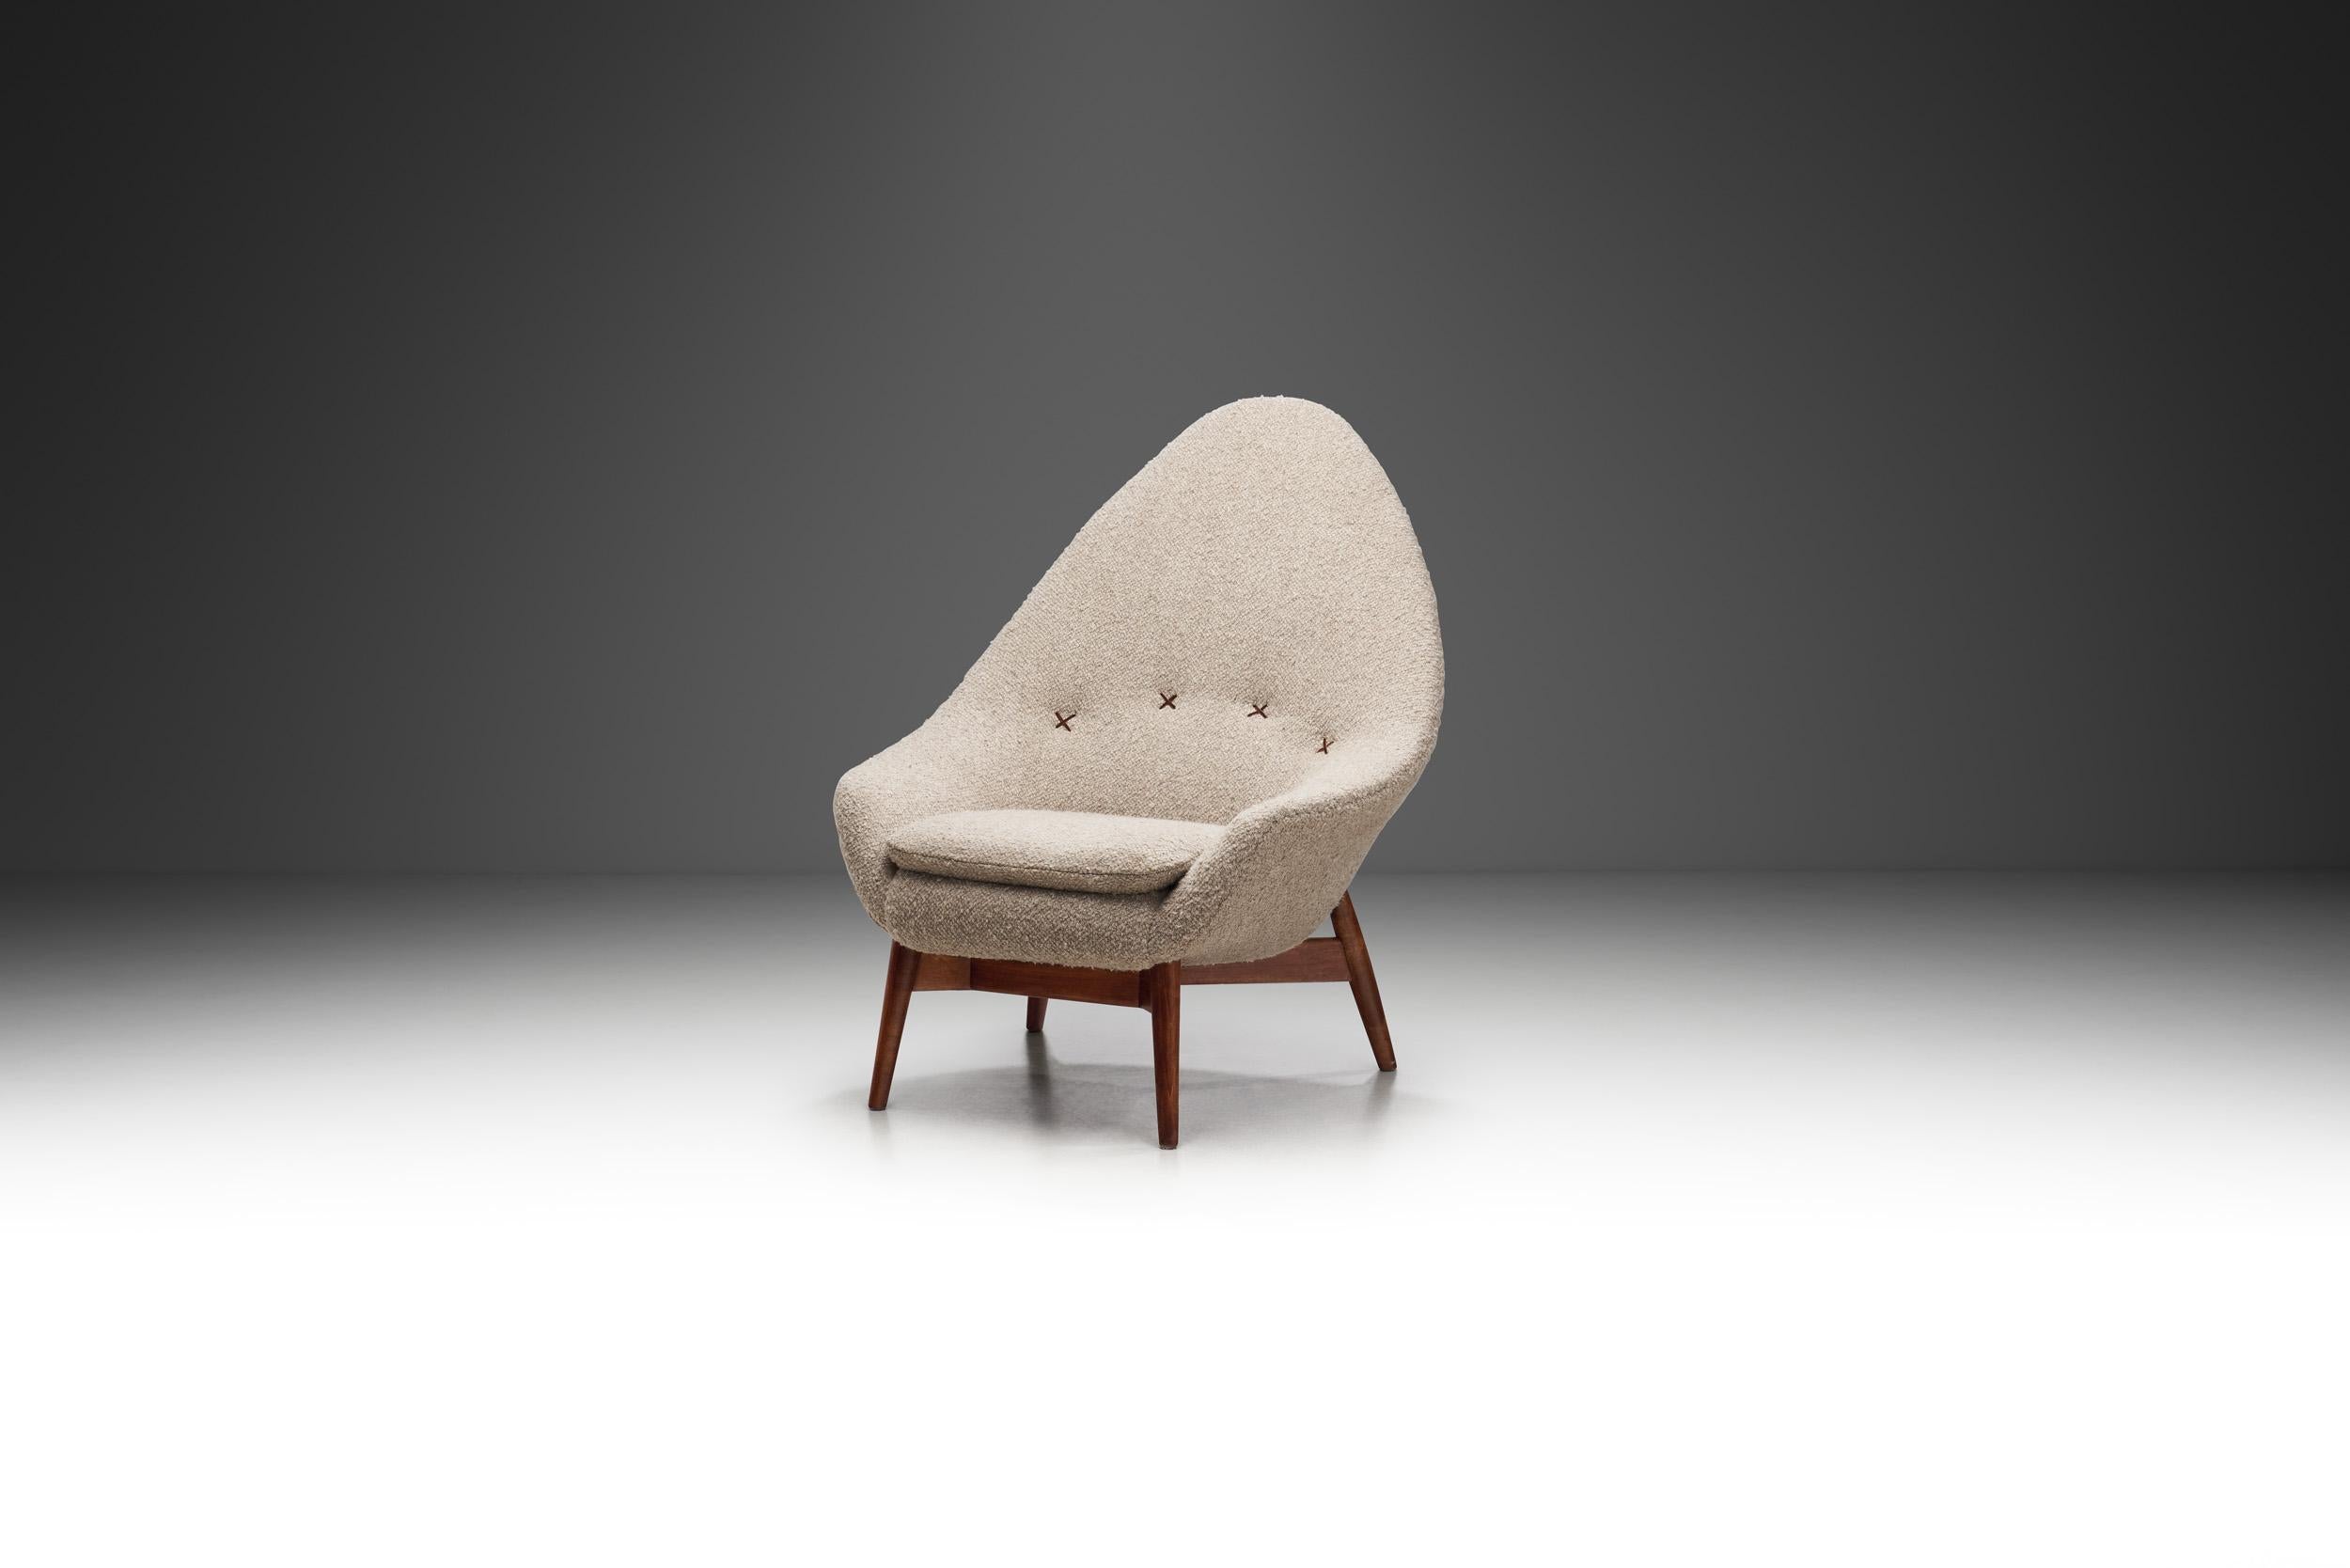 Finnish master cabinetmakers, like Olof Ottelin, have been creating products that last for a lifetime and become heirlooms naturally. Crafted with precision from solid wood, finished with attention to detail and care, this lounge chair stands the